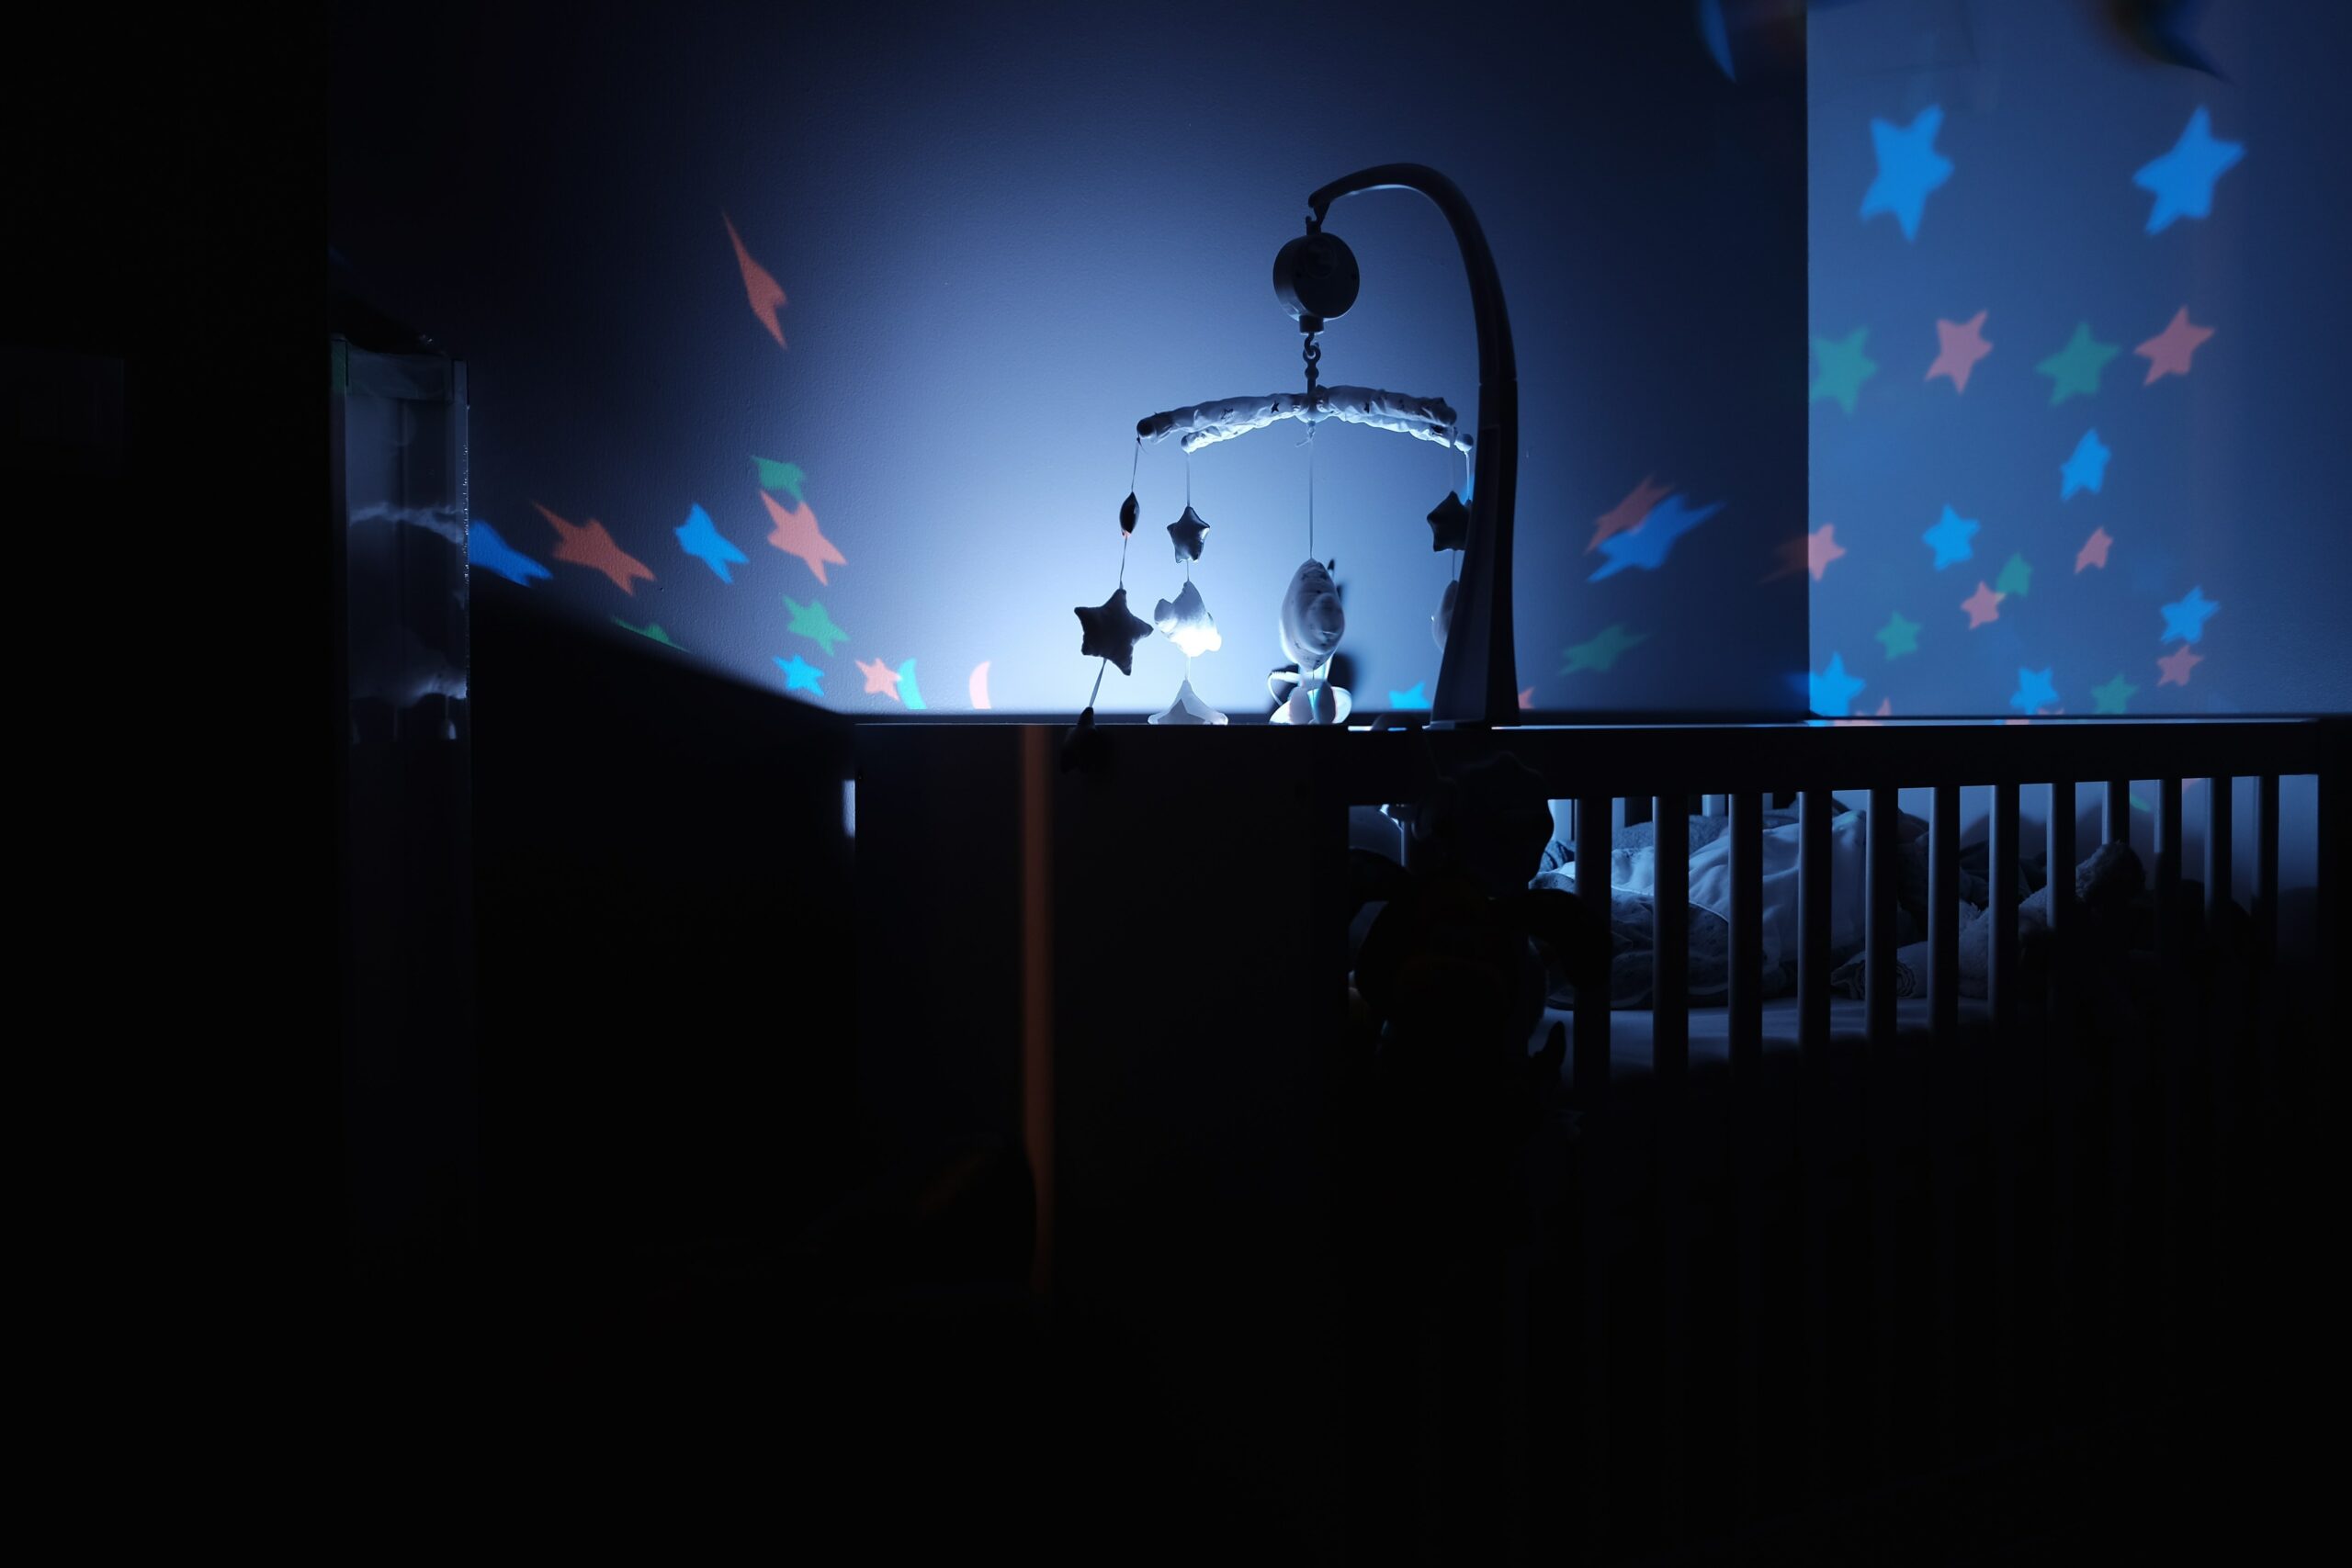 A night-time photo of a baby crib and dangling baby toys (photo by Bastien Jaillot from Unsplash)